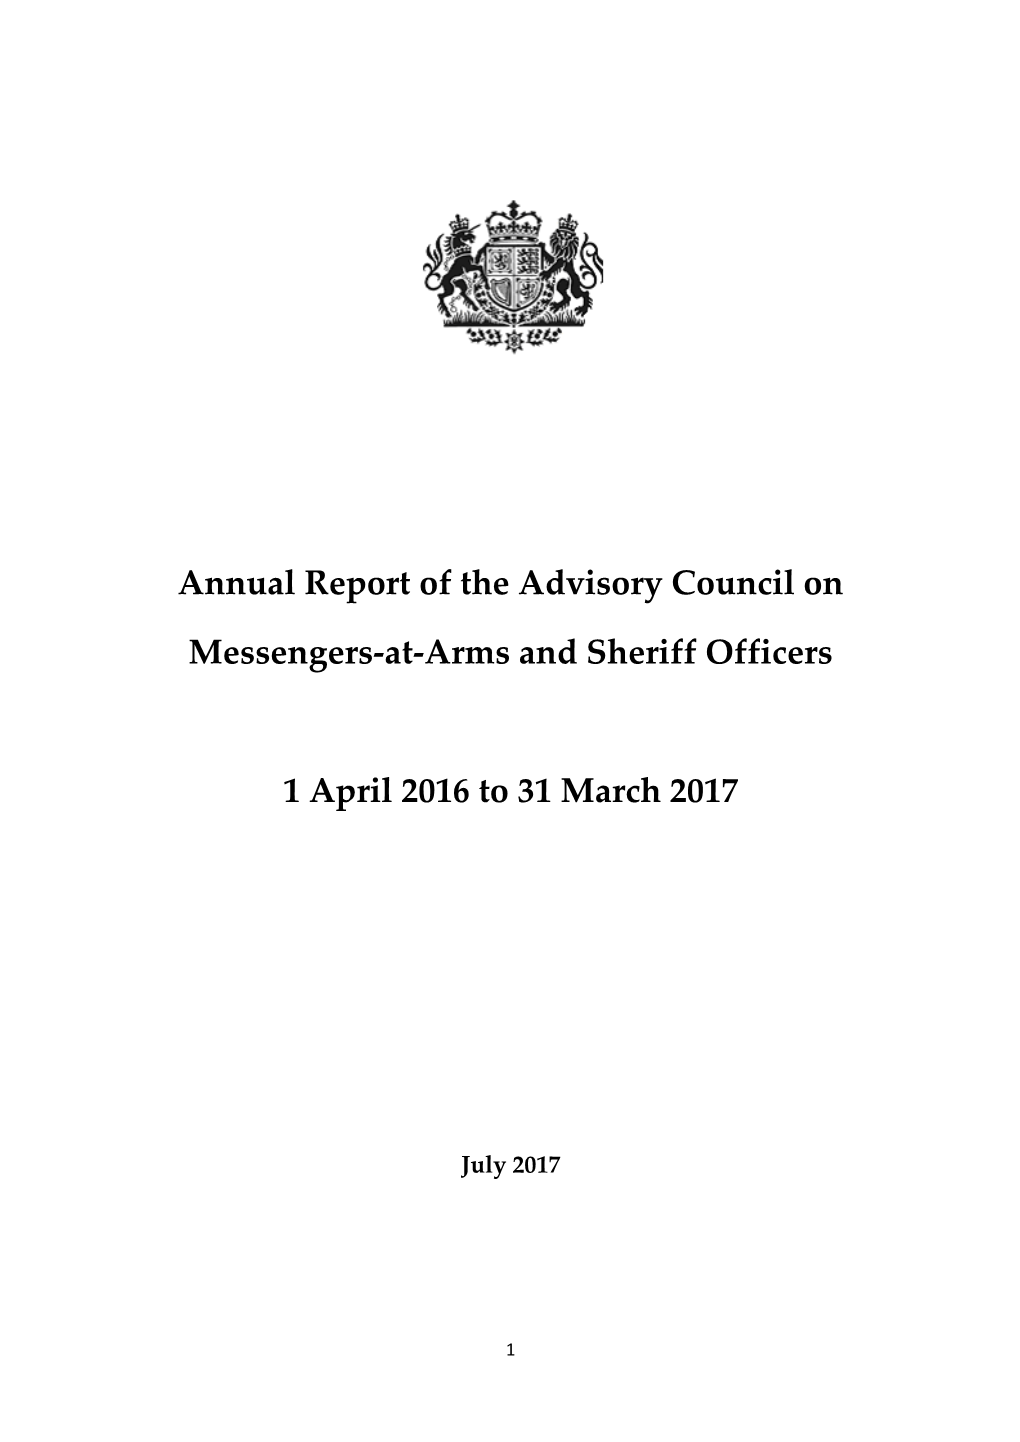 Annual Report of the Advisory Council on Messengers-At